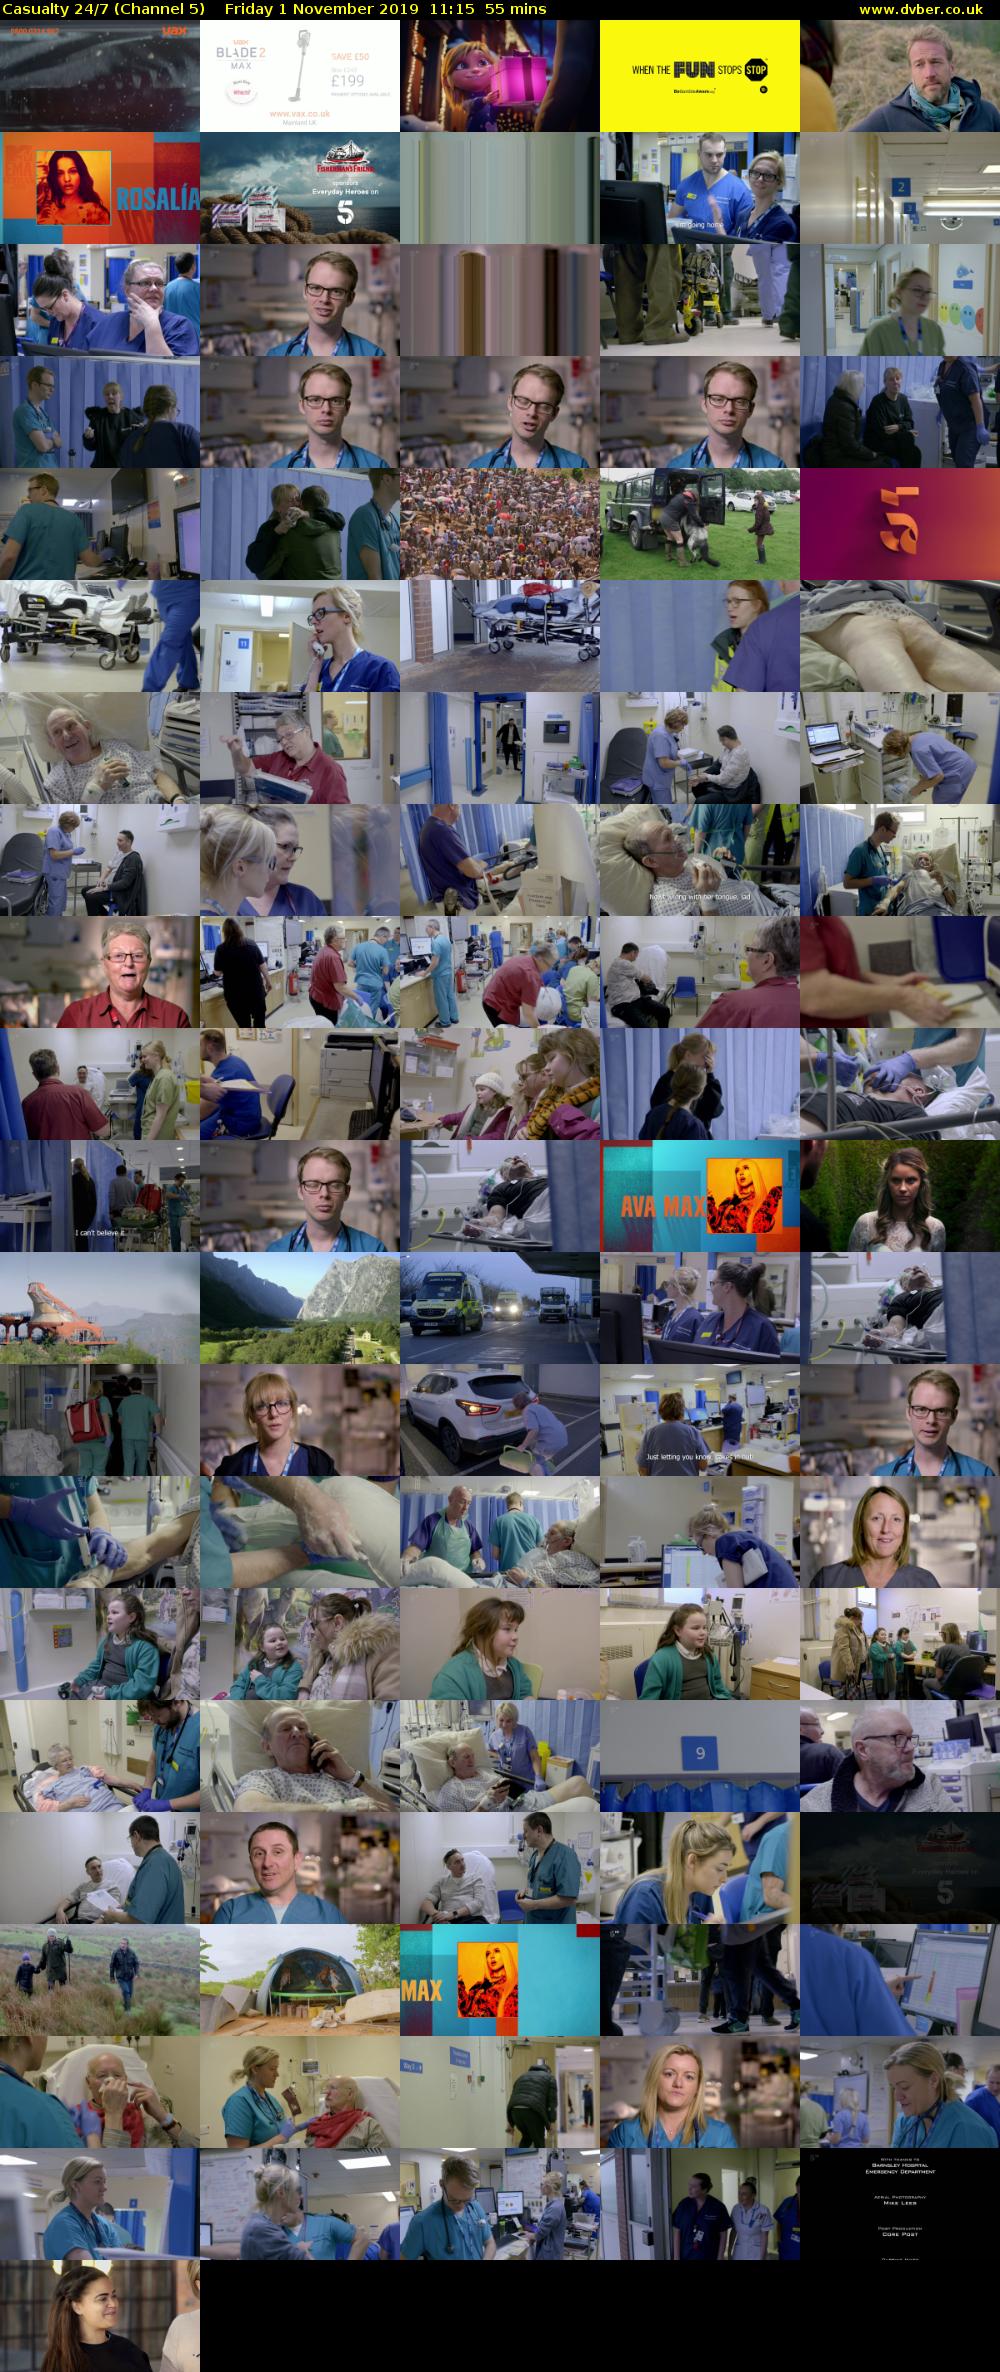 Casualty 24/7 (Channel 5) Friday 1 November 2019 11:15 - 12:10